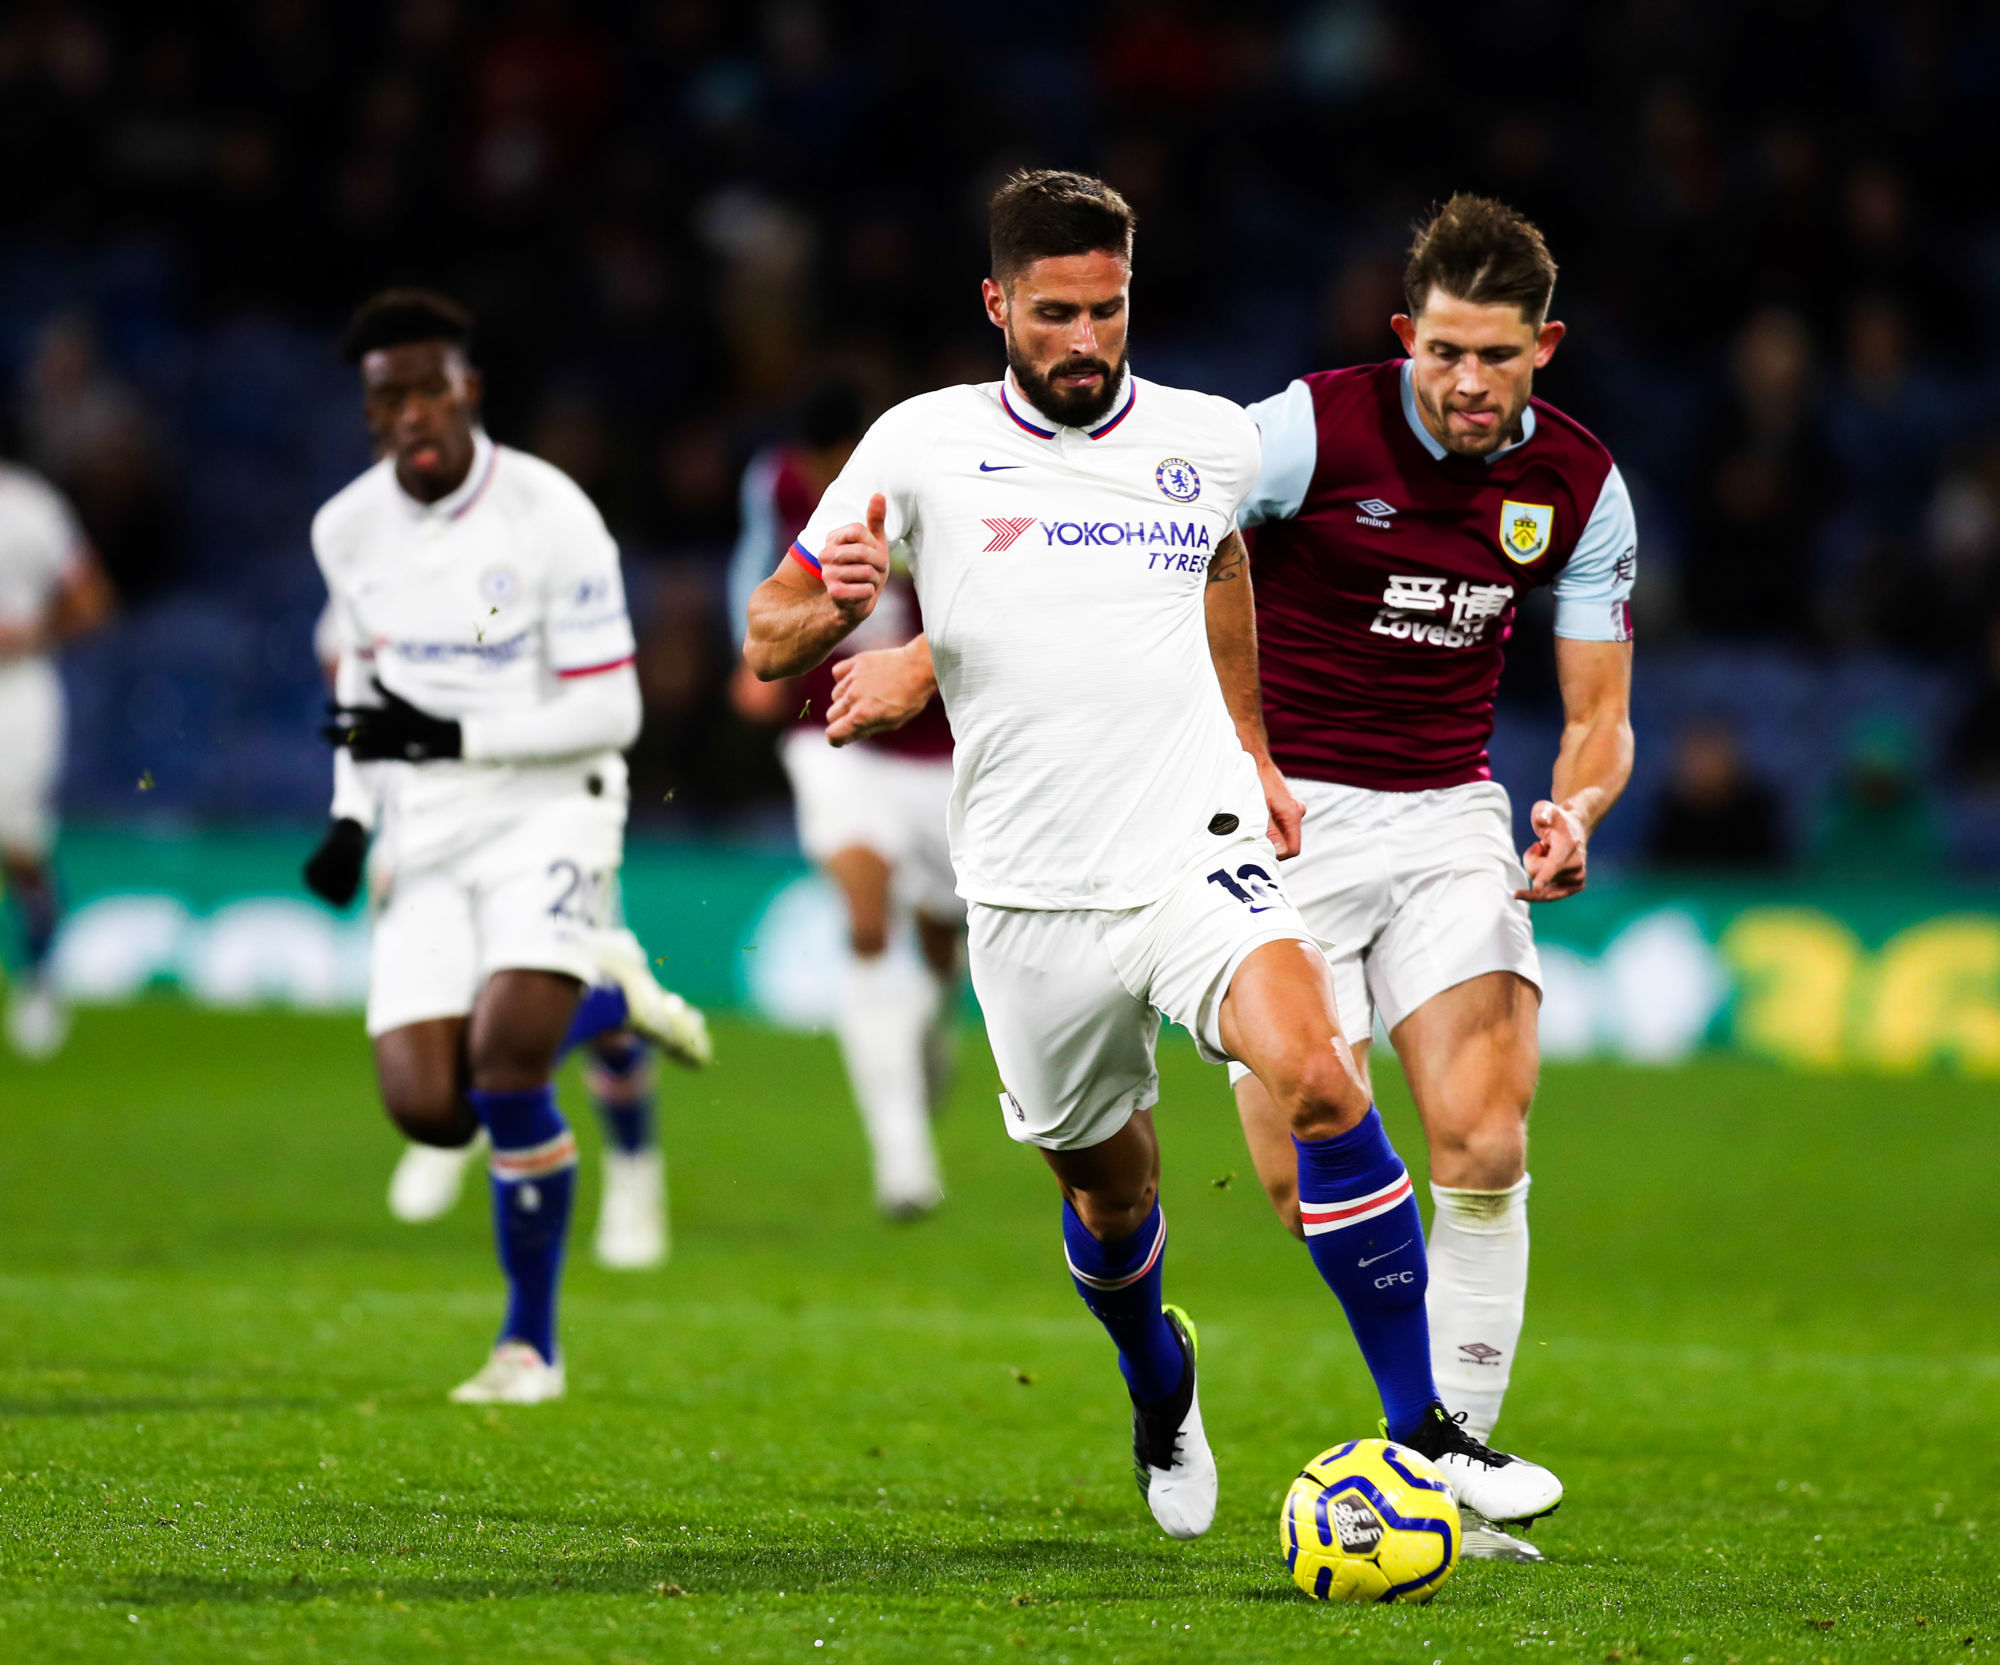 26th October 2019; Turf Moor, Burnley, Lancashire, England; English Premier League Football, Burnley versus Chelsea; Olivier Giroud of Chelsea is chased by James Tarkowski of Burnley  - Strictly Editorial Use Only. No use with unauthorized audio, video, data, fixture lists, club/league logos or 'live' services. Online in-match use limited to 120 images, no video emulation. No use in betting, games or single club/league/player publications 


Photo by Icon Sport - Olivier GIROUD - James TARKOWSKI - Turf Moor - Burnley (Angleterre)